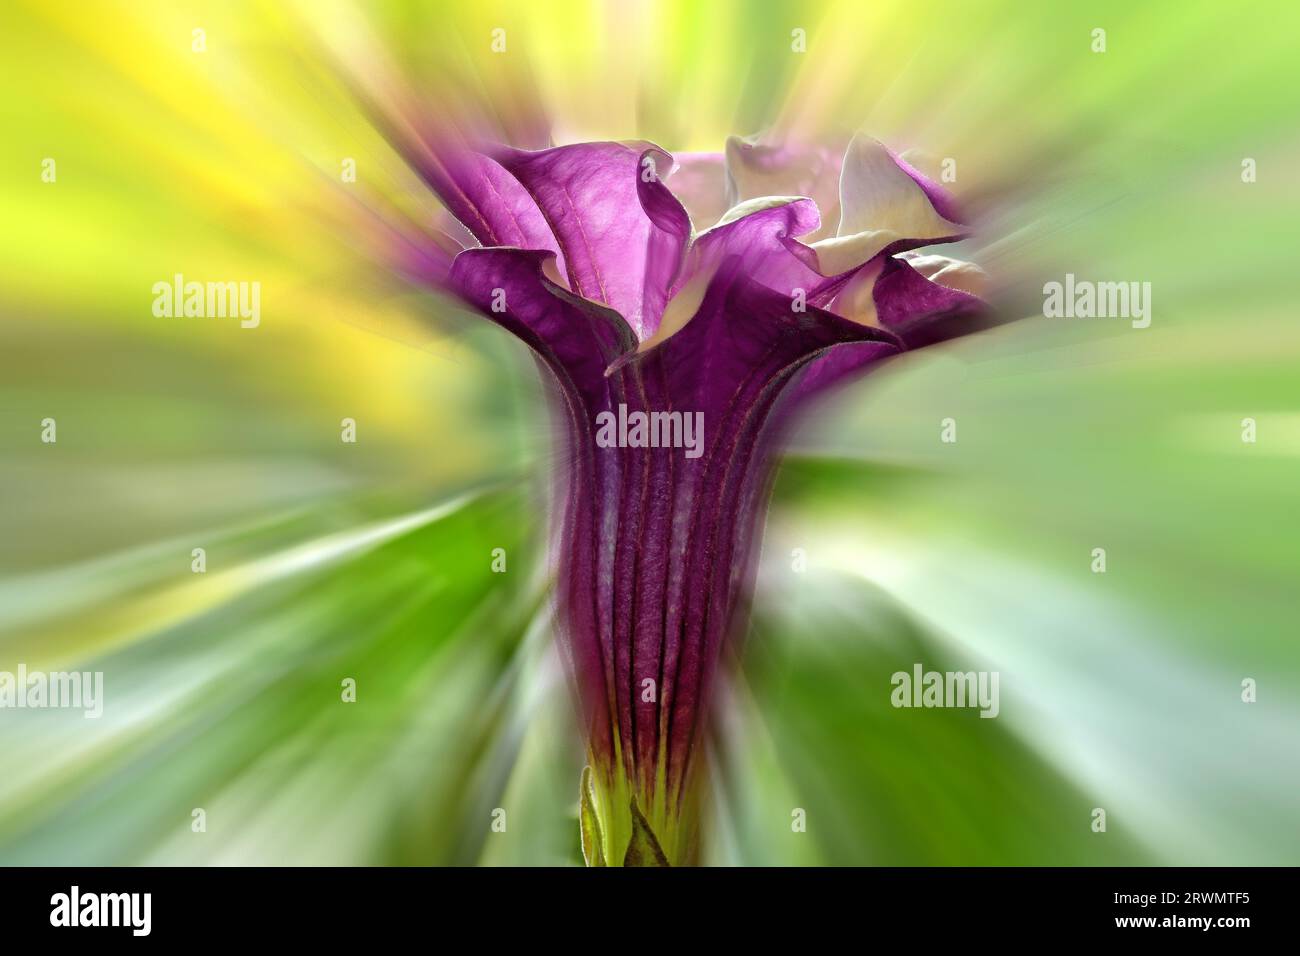 thorn apple with violet and white flower, blurred with sharp center Stock Photo